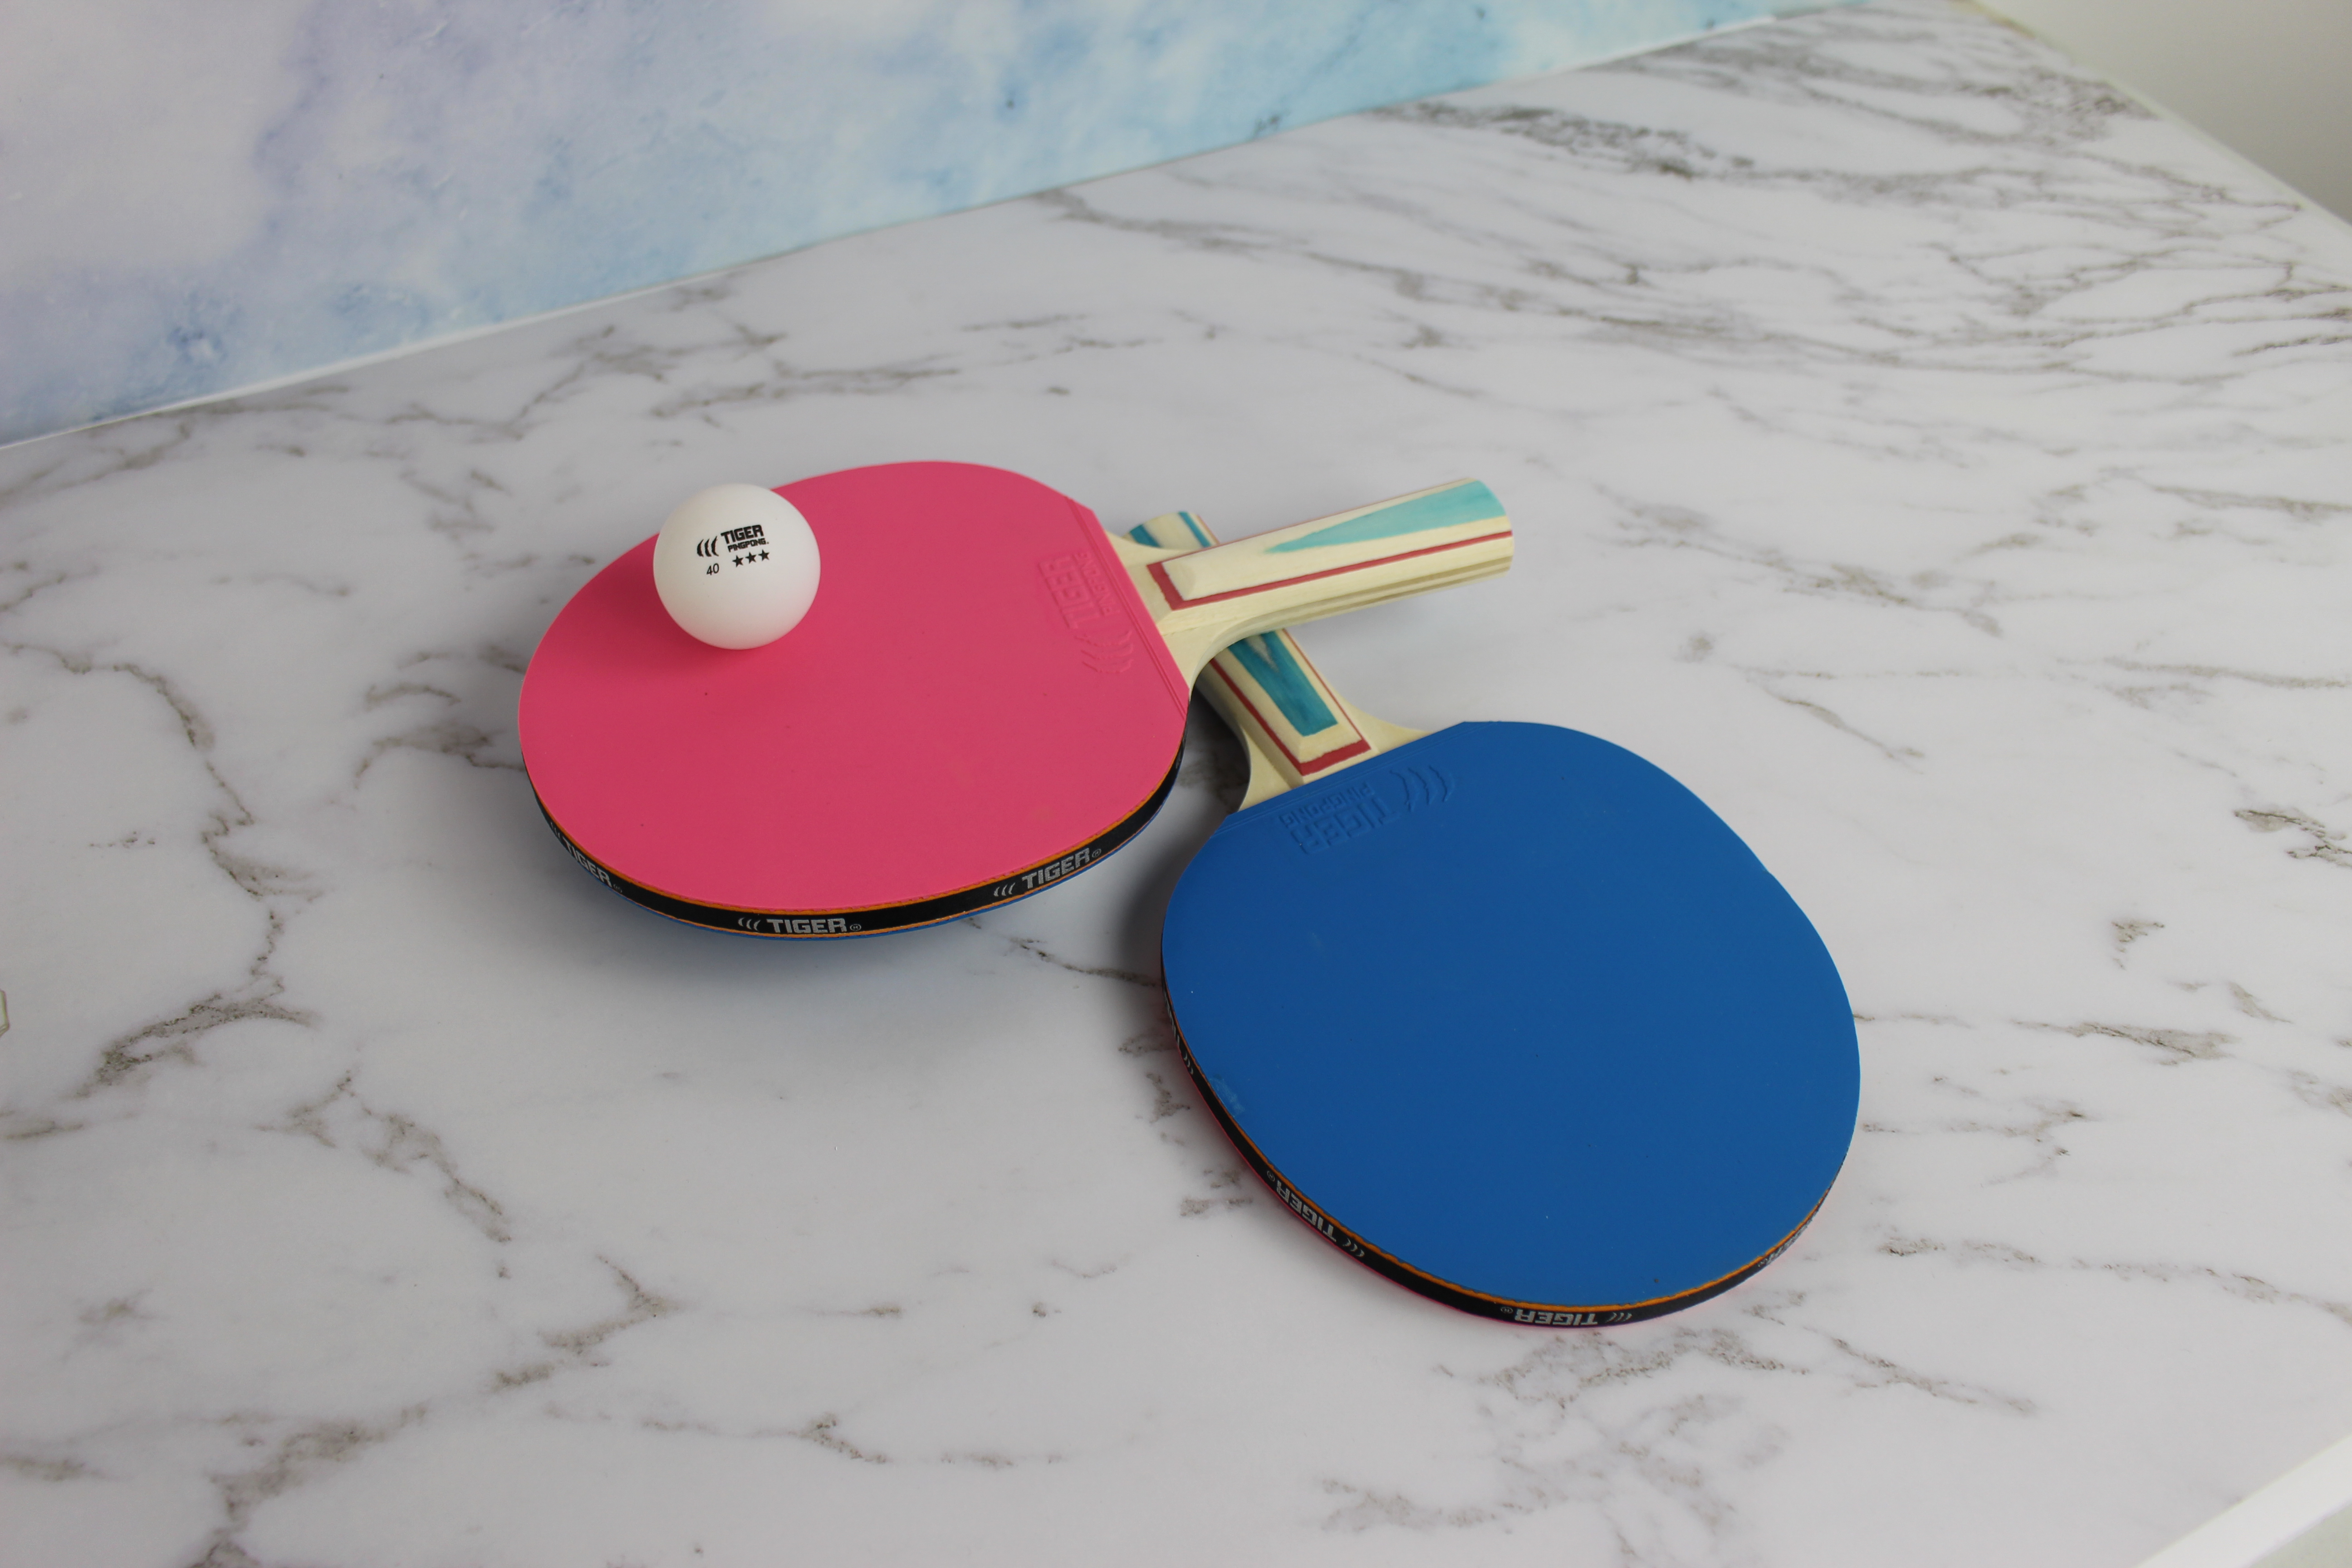 Ping pong ball on top of two ping pong paddles that are lying on a marble counter